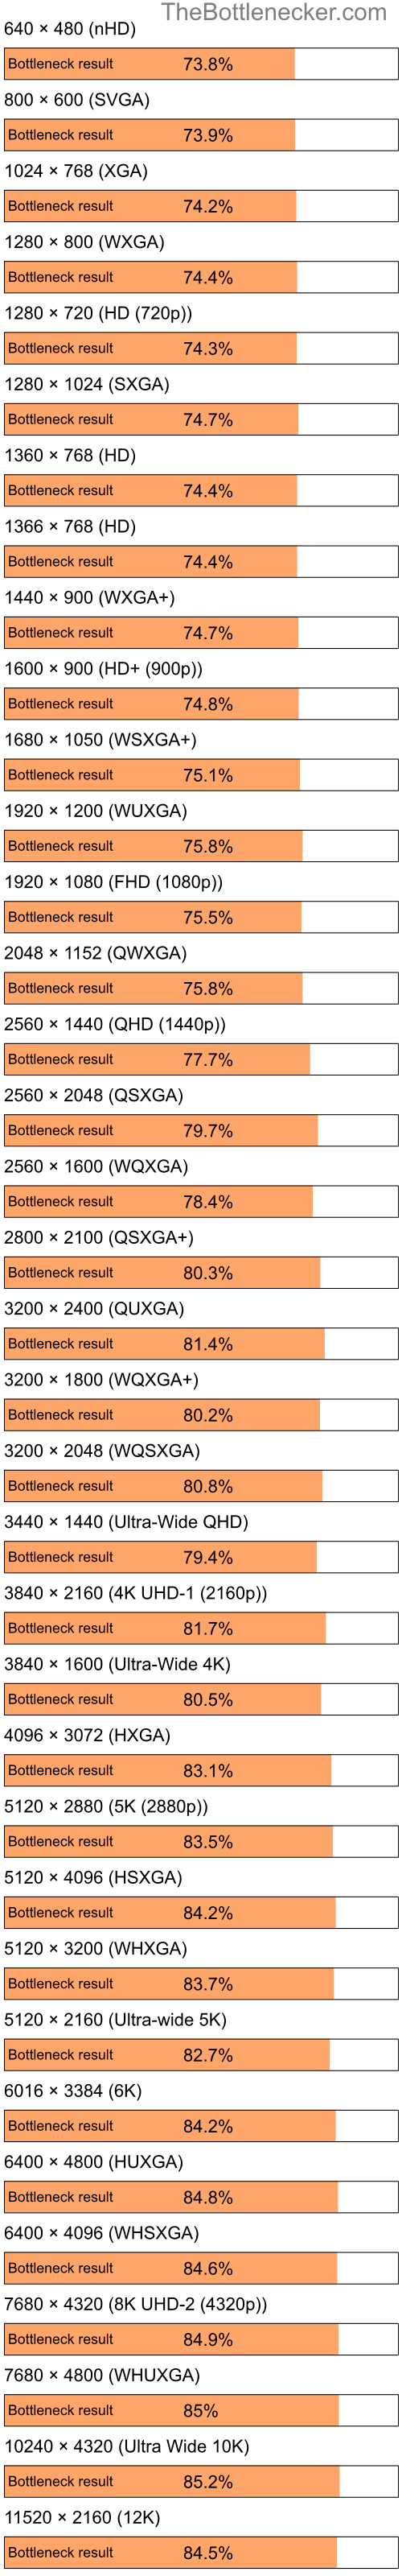 Bottleneck results by resolution for Intel Celeron M 420 and NVIDIA GeForce 9300 GE in Graphic Card Intense Tasks